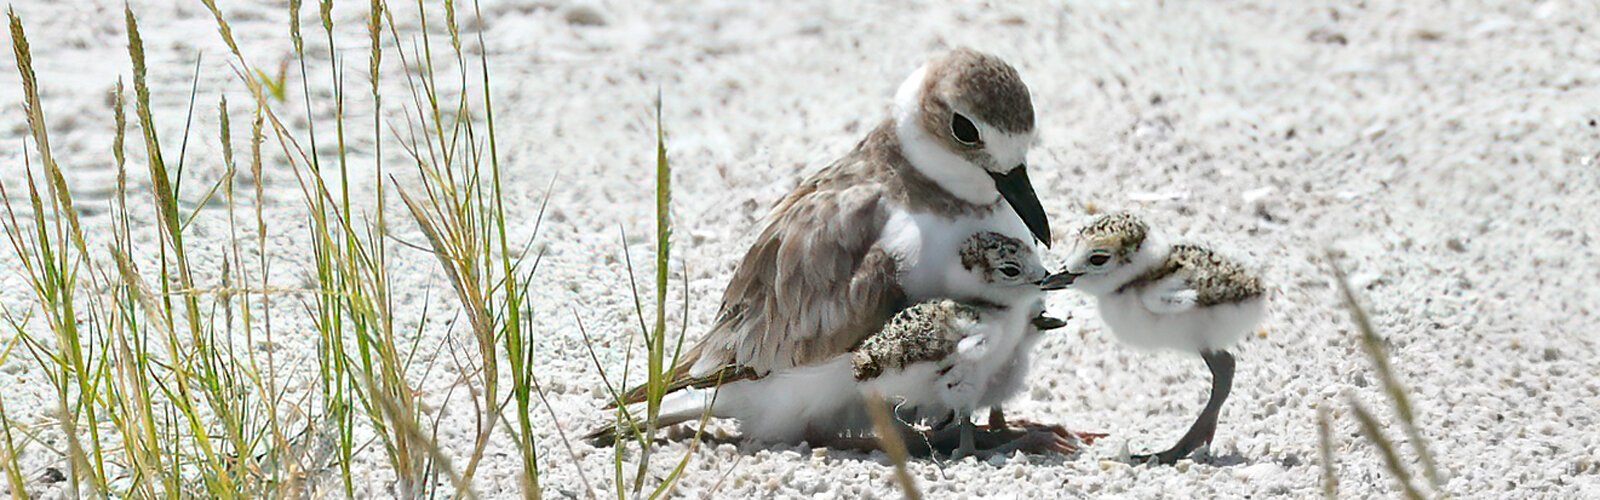 Wilson’s plovers nest on beaches and their chicks start foraging for insects within hours of hatching while their parents keep watch. For their survival, it is very important to give them space and not stress them by chasing after them. 